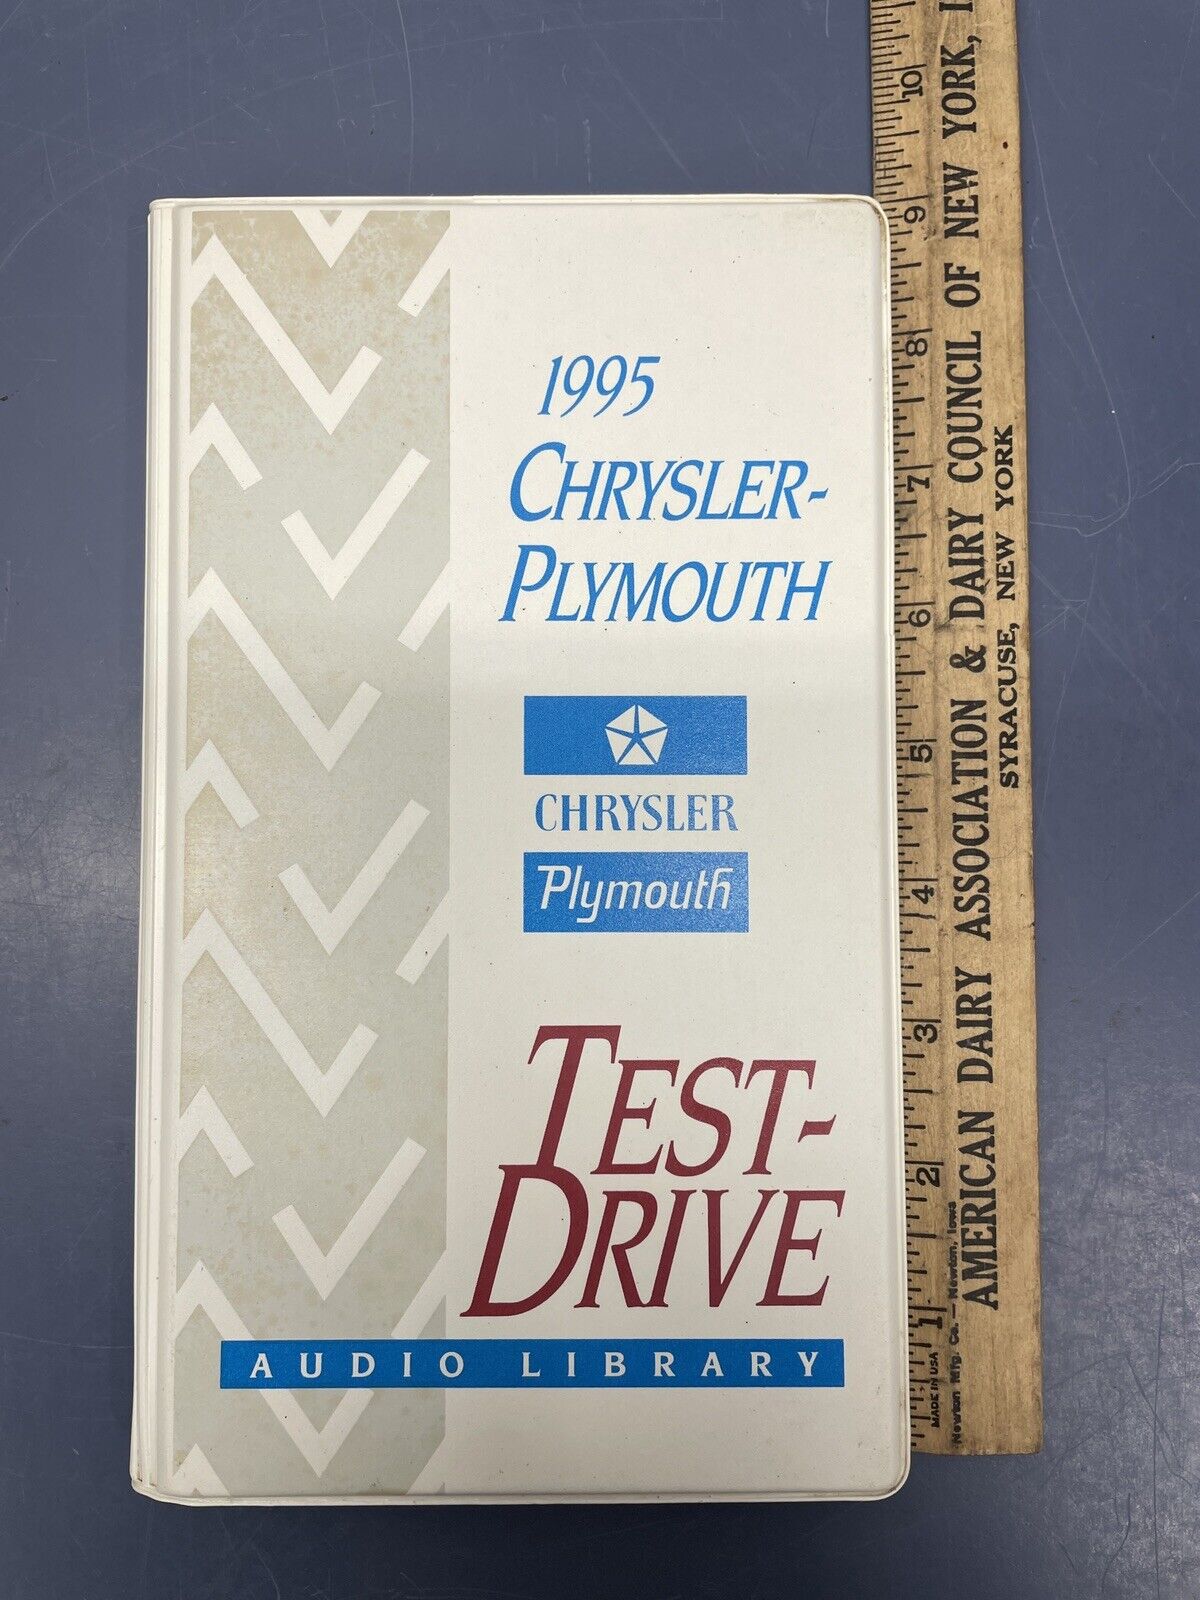 Rare 1995 Chrysler Plymouth Test Drive Audio Library 3 Cassettes In Case LHS